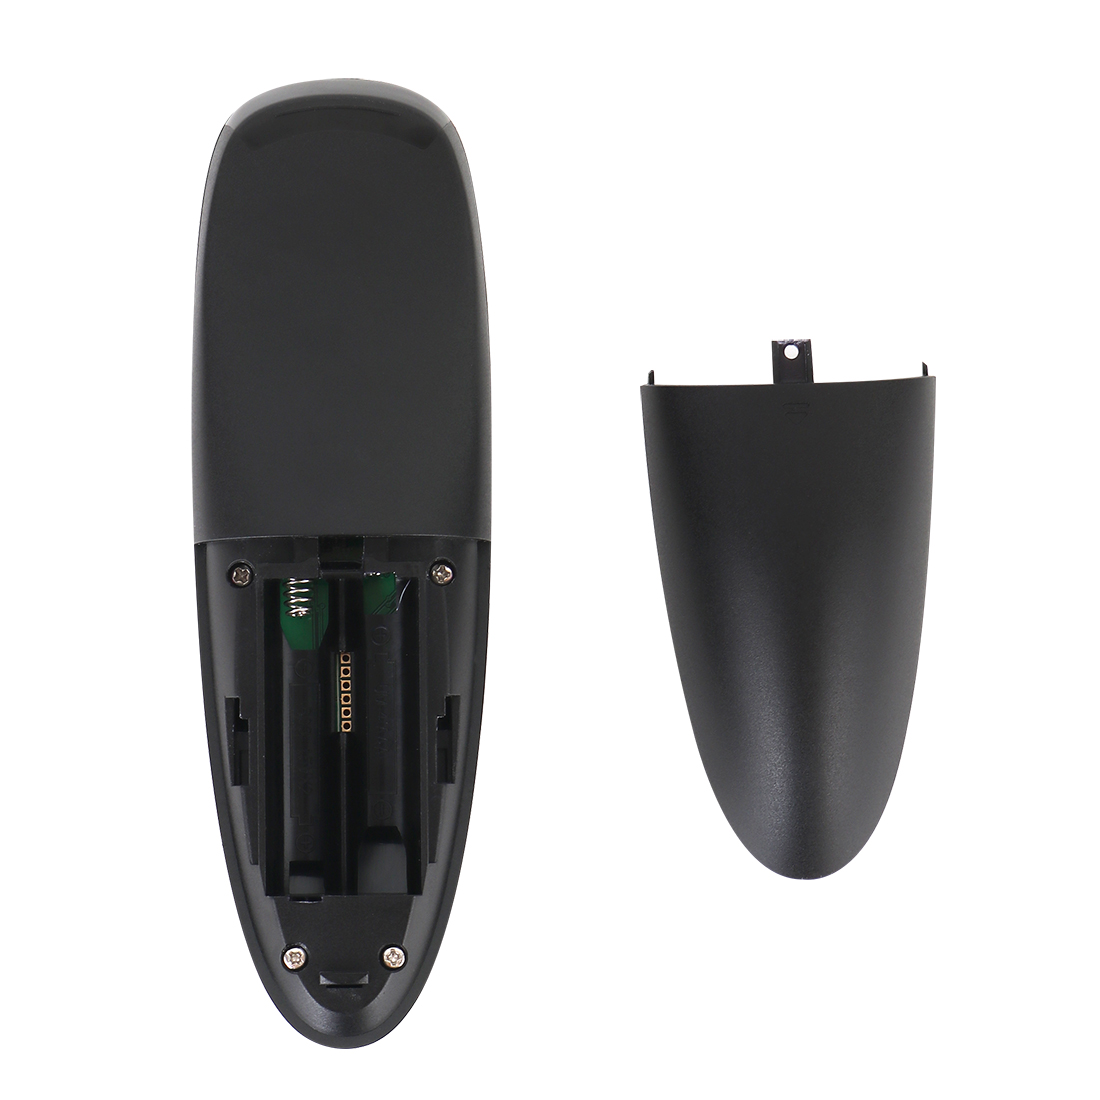 Find G10s Gyroscope 2.4GHz WIFI Googlo Assistant Voice Remote Control Air Mouse for Sale on Gipsybee.com with cryptocurrencies